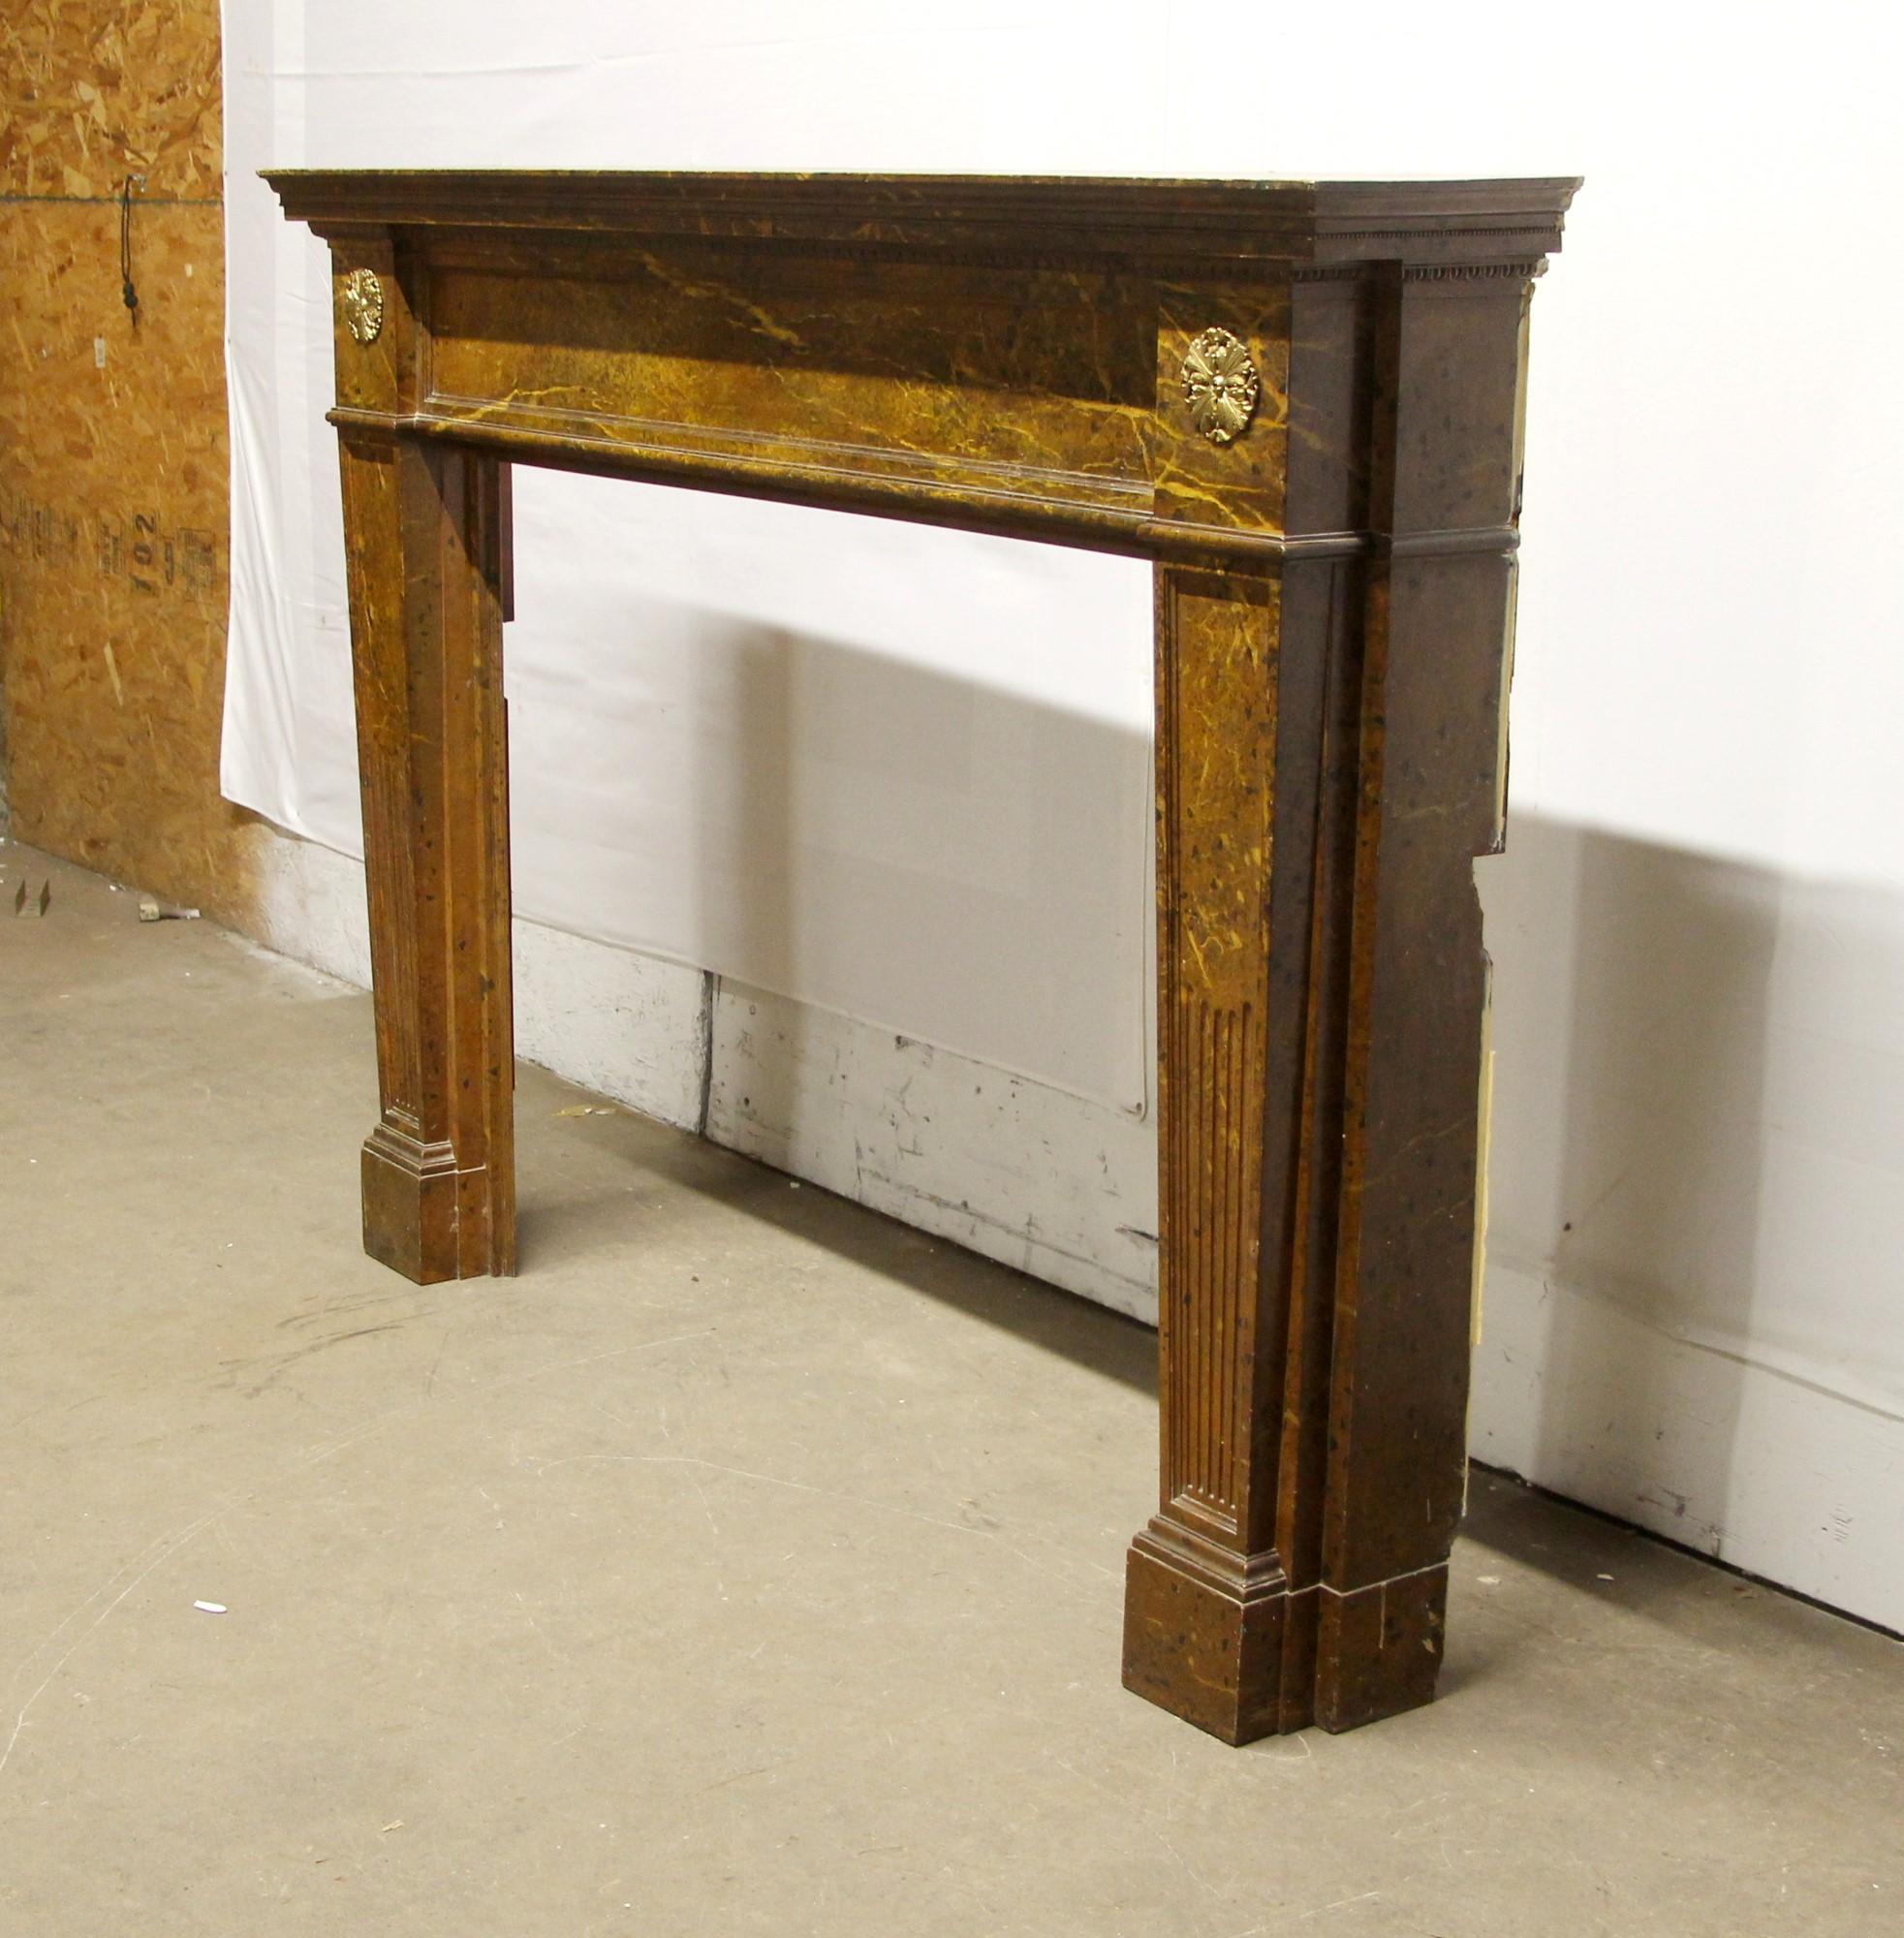 Early 20th Century 1910s Wood Regency Mantel Done in a Faux Marble Look 2 Brass Florets